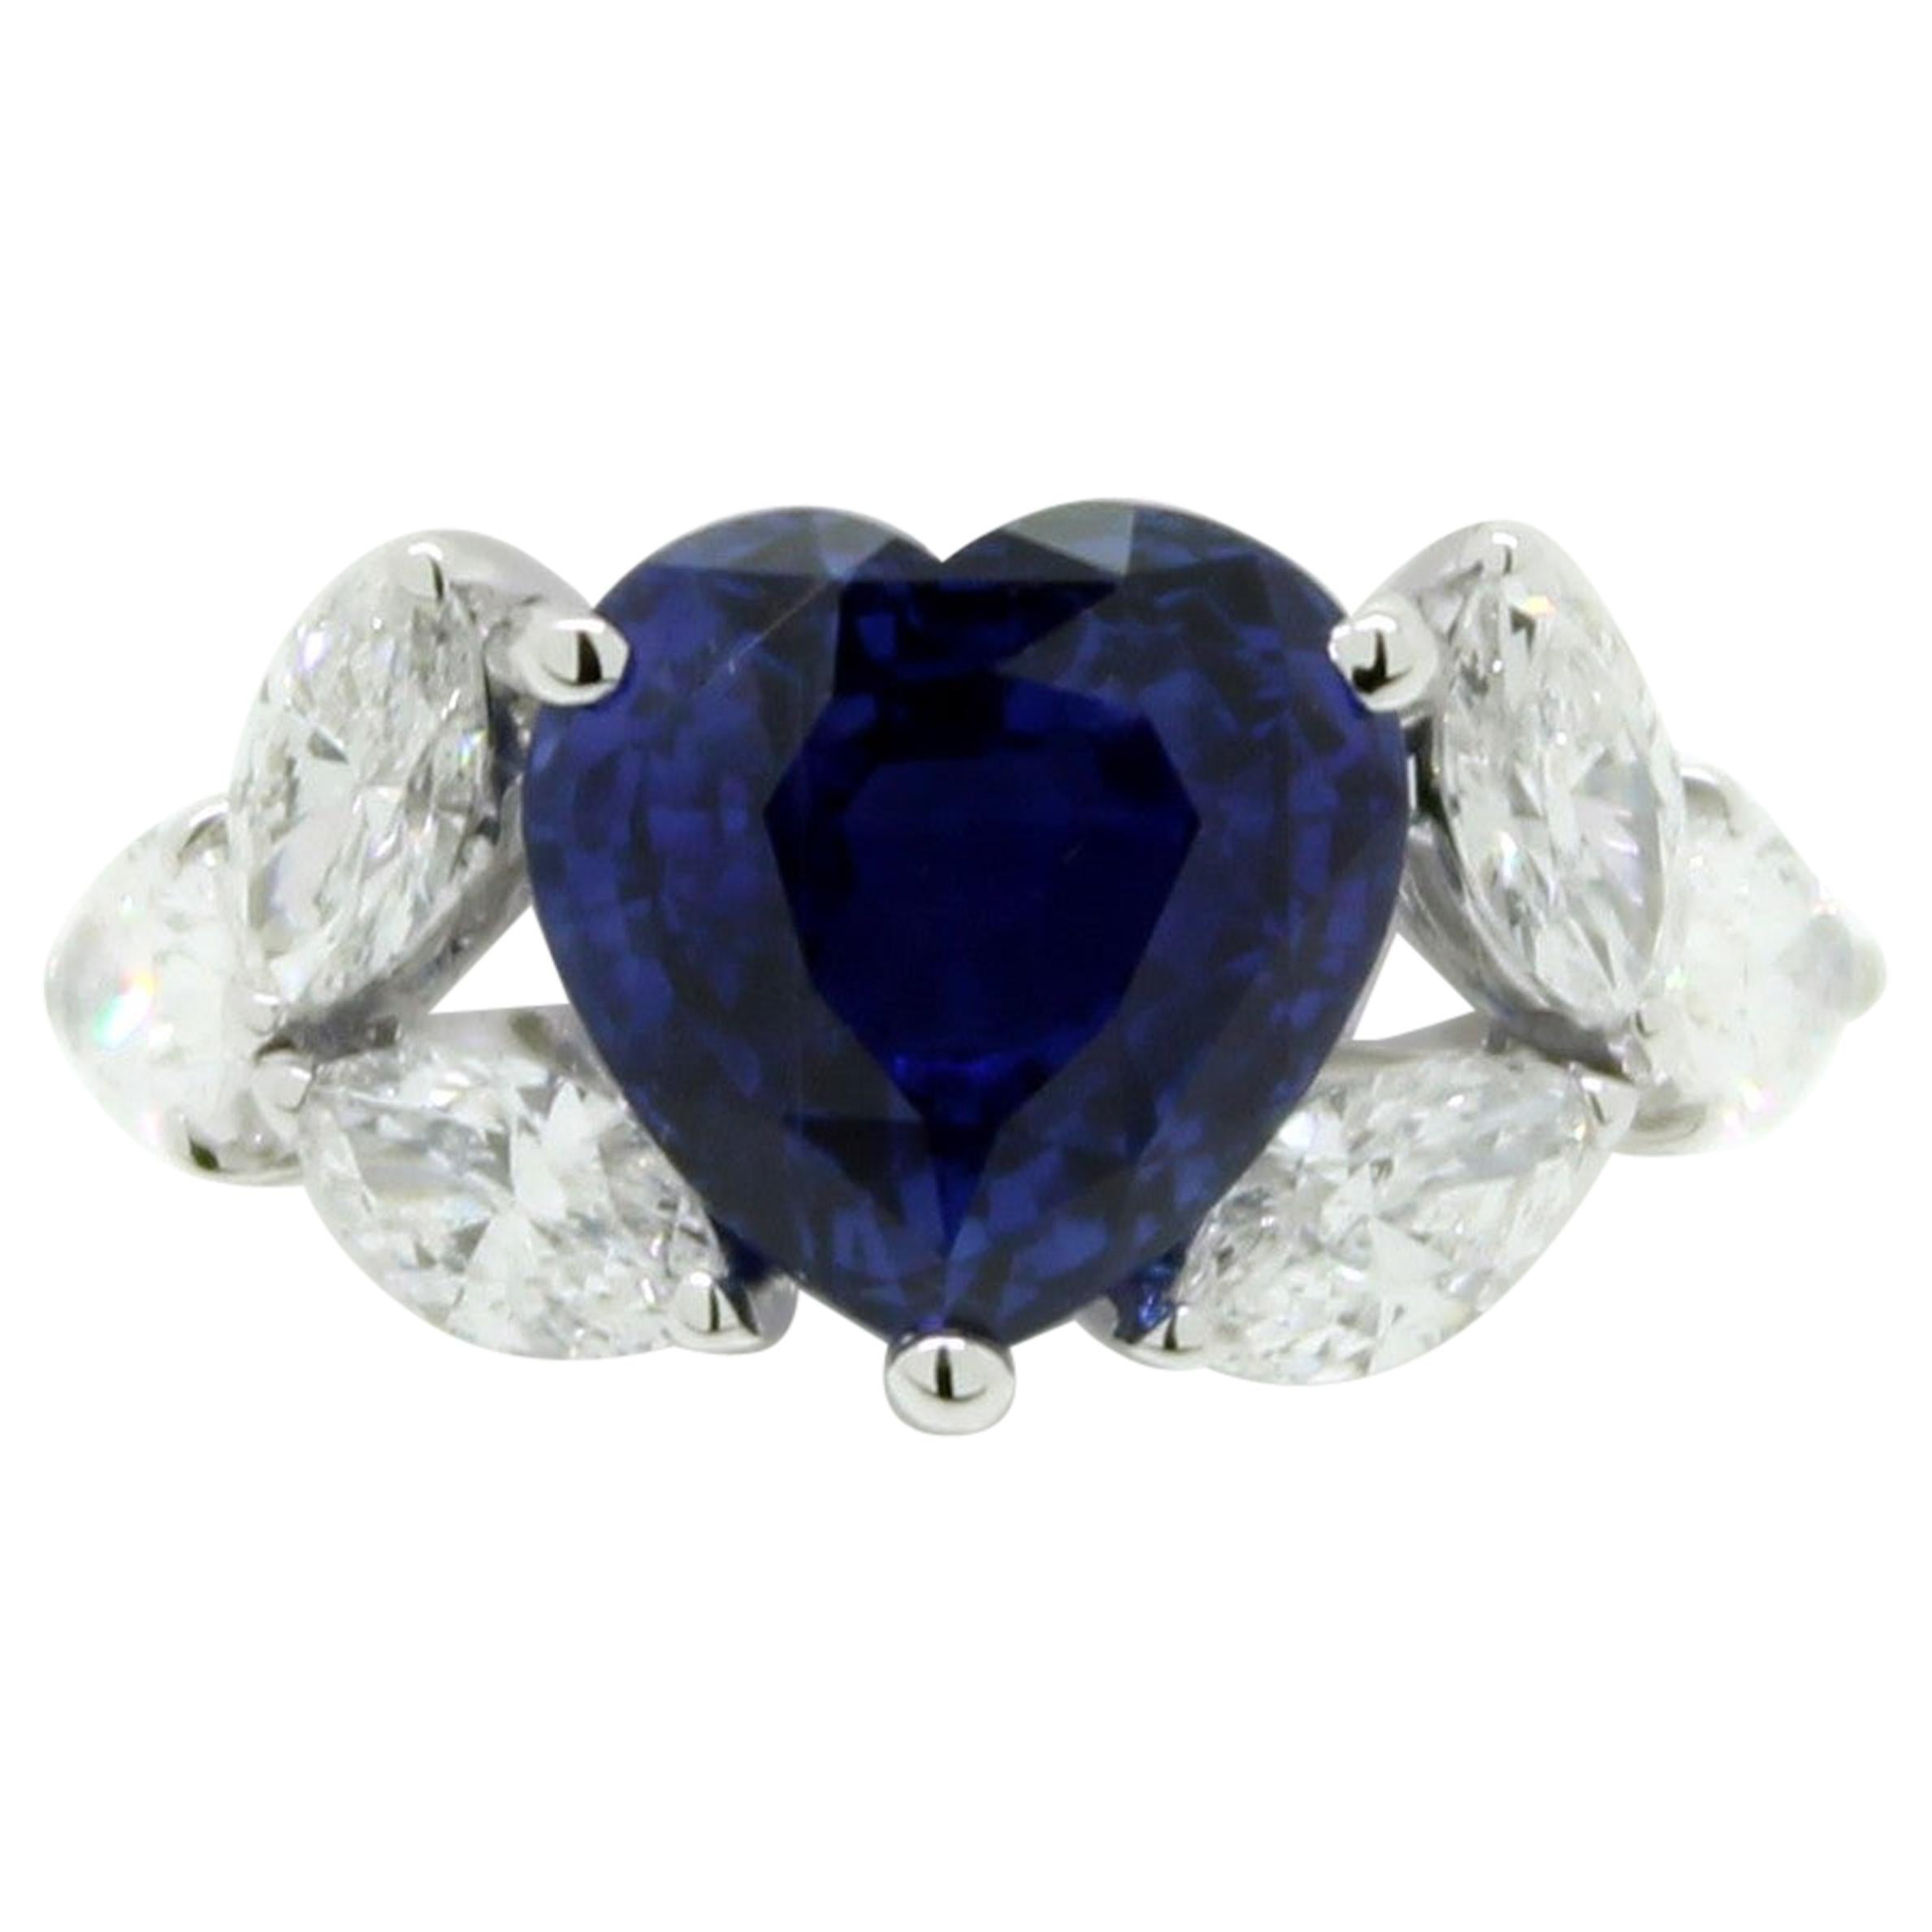 5.95 Carat Heart Shape Sapphire and White Marquise Diamond Cocktail Ring For Sale